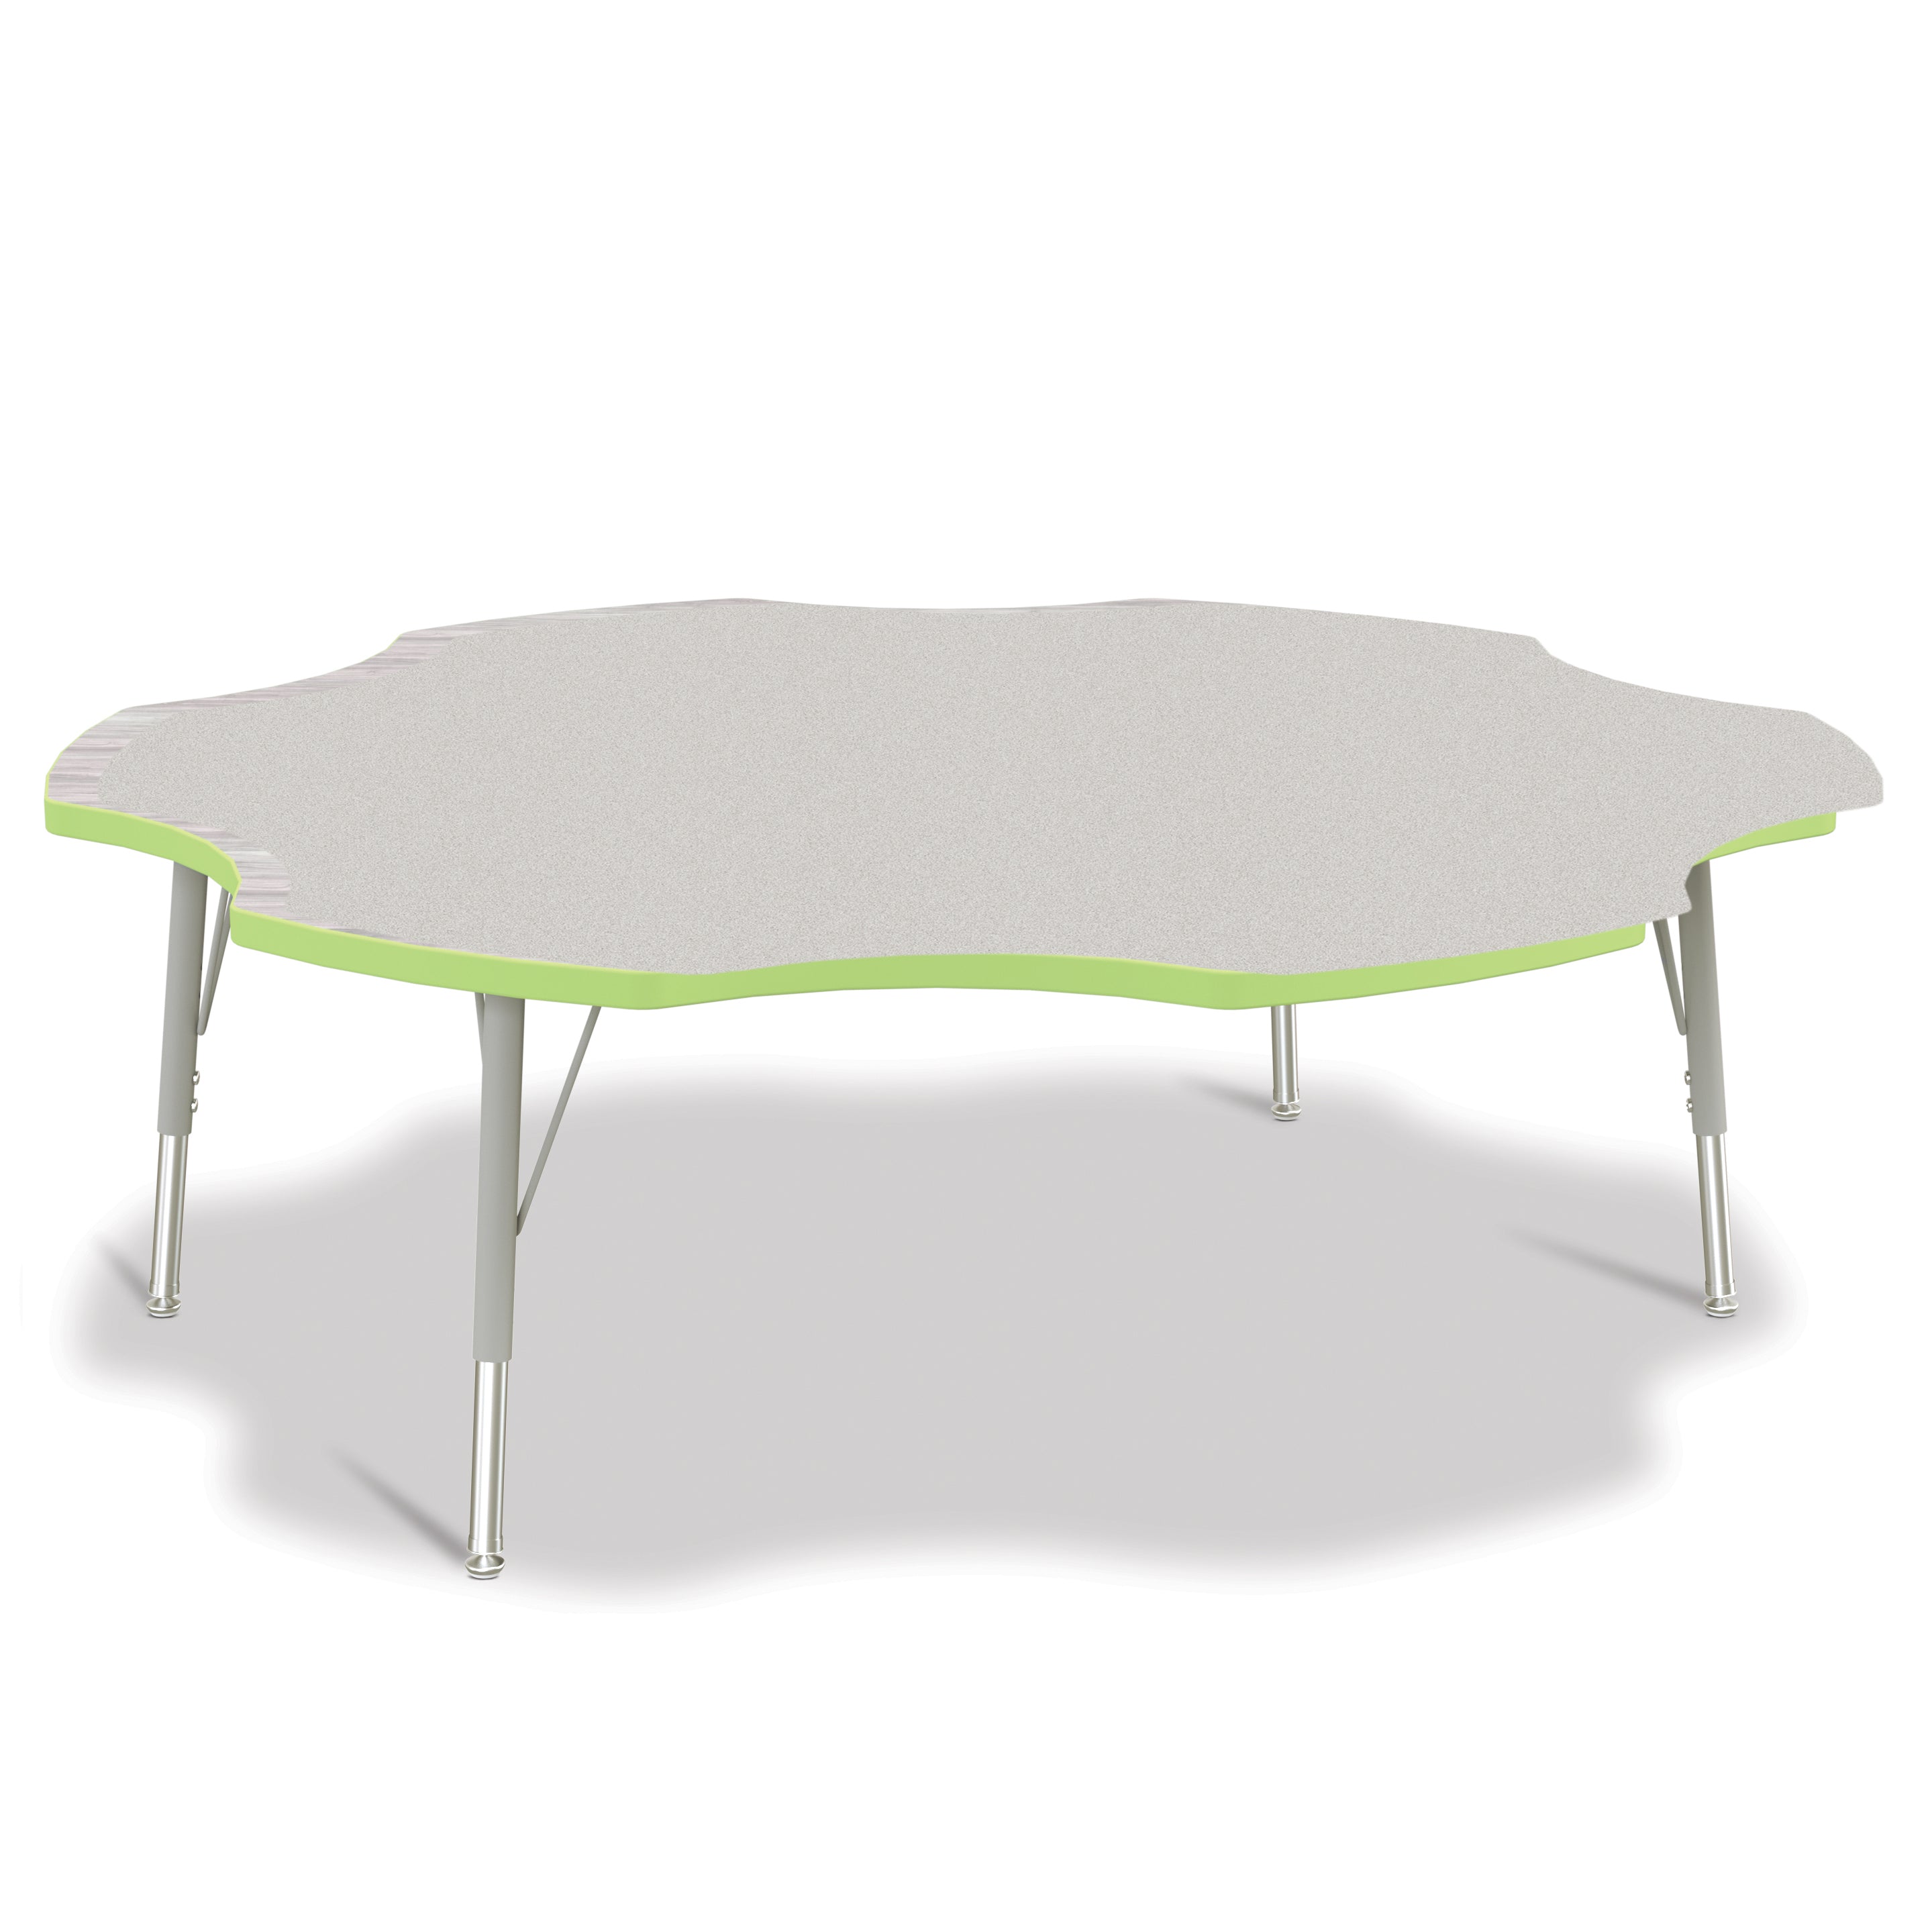 6458JCE130, Berries Six Leaf Activity Table - 60", E-height - Freckled Gray/Key Lime/Gray